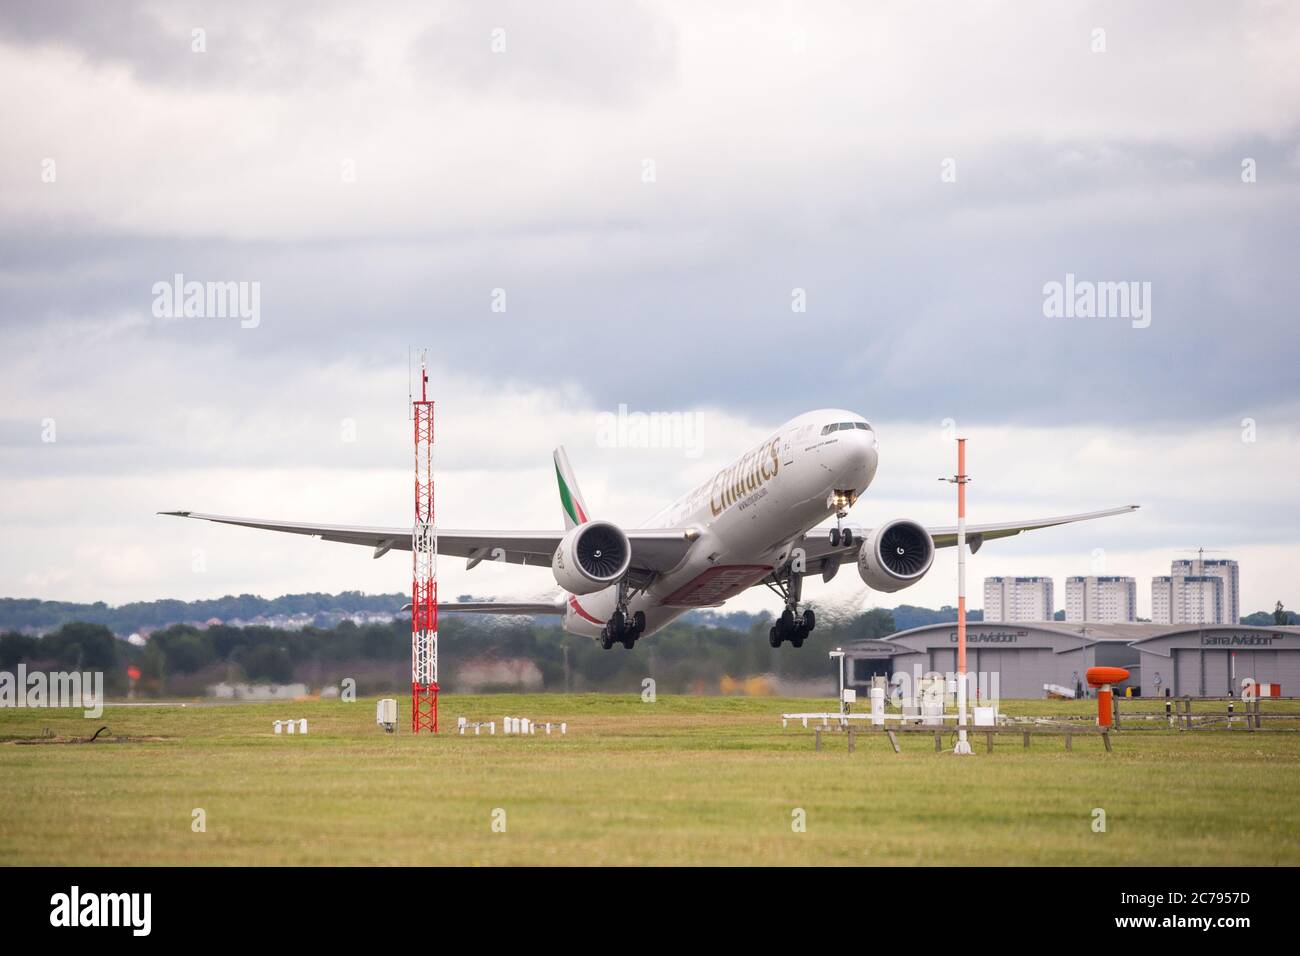 Glasgow, Scotland, UK. 15th July, 2020. Pictured: Emirates flight EK28, Boeing 777-31H(ER) aircraft (reg A6-EGE) departs Glasgow International Airport for Dubai. First flight back after the lockdown was eased. Following the coronavirus (COVID19) crisis, the global aviation industry has been massively affected, causing some airlines to go bust and the others to cut huge numbers of staff and cancel orders on new aircraft. Emirates cancelled their flights to Glasgow until today. Credit: Colin Fisher/Alamy Live News Stock Photo